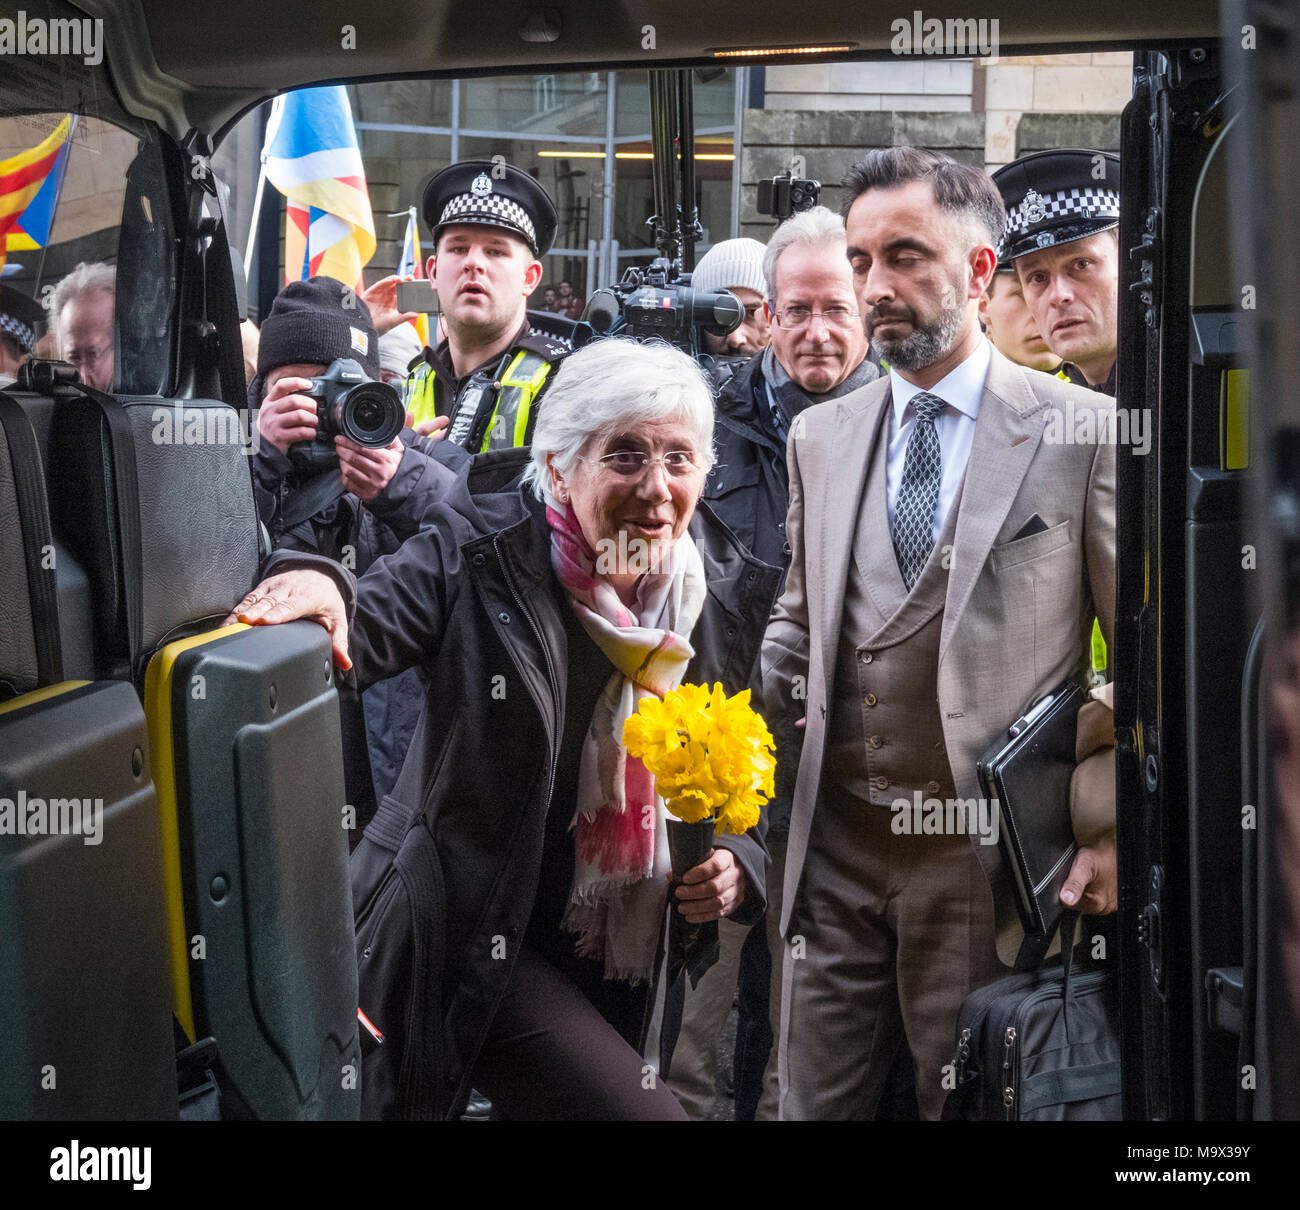 Edinburgh, Scotland,UK. 28 March 2018.  Clara Ponsati  leaving  Edinburgh Sheriff Court after her hearing. Ponsati faces extradition to Spain to face charges of rebellion over her support of Catalan Independence. Credit: Iain Masterton/Alamy Live News Stock Photo